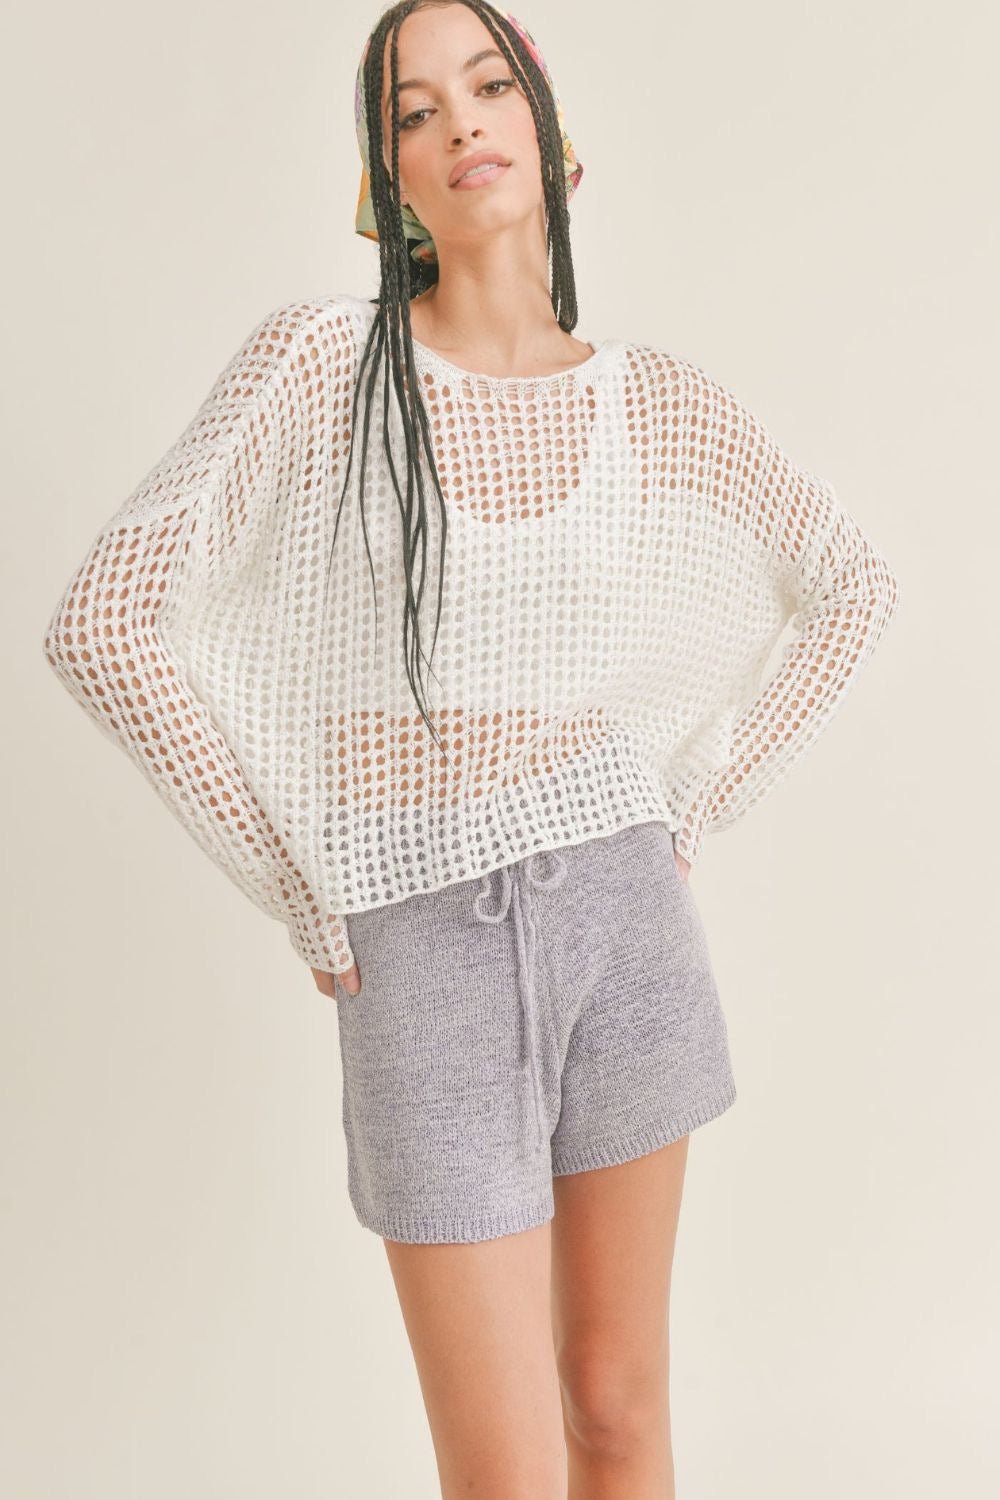 Sage The Label | Boho Crochet Long Sleeve Top | Ivory - Women&#39;s Shirts &amp; Tops - Blooming Daily